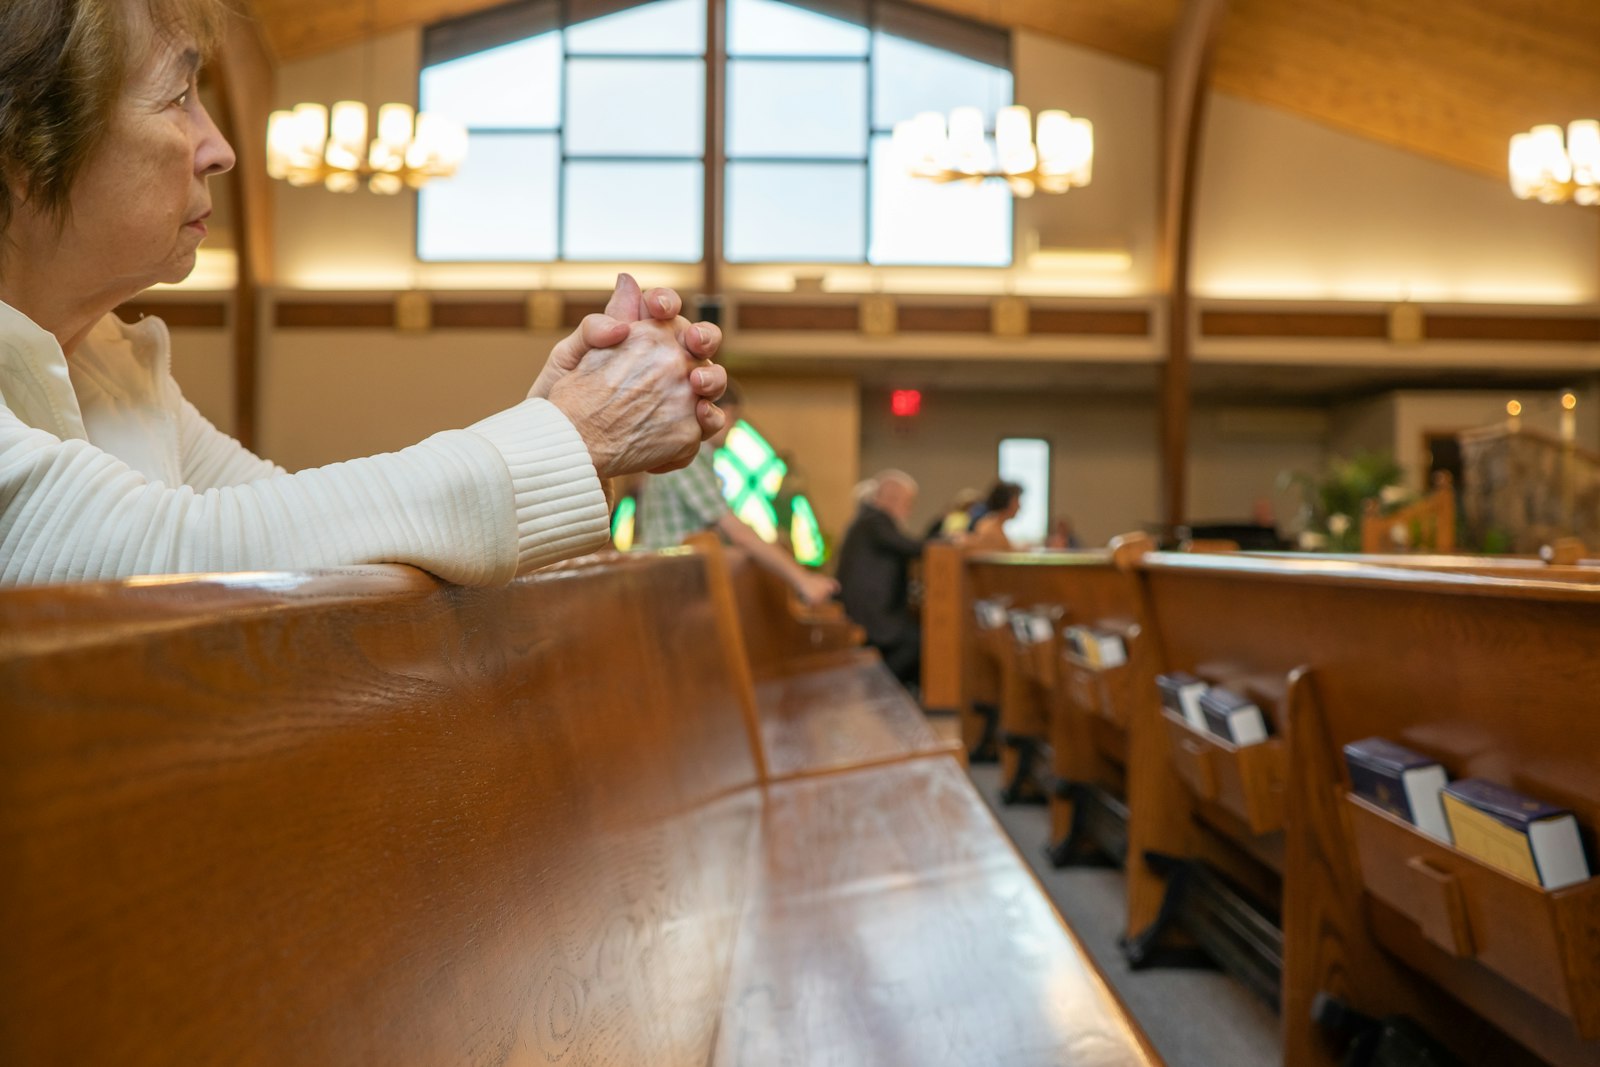 A woman prays before the Blessed Sacrament at SS. Peter and Paul Parish in North Branch. “After COVID, people got into the habit of not coming to Mass," said Fr. Rich Treml, pastor of SS. Peter and Paul. "I think we really need a Eucharistic revival now more than ever. We take our faith for granted. We take the Eucharist for granted.”